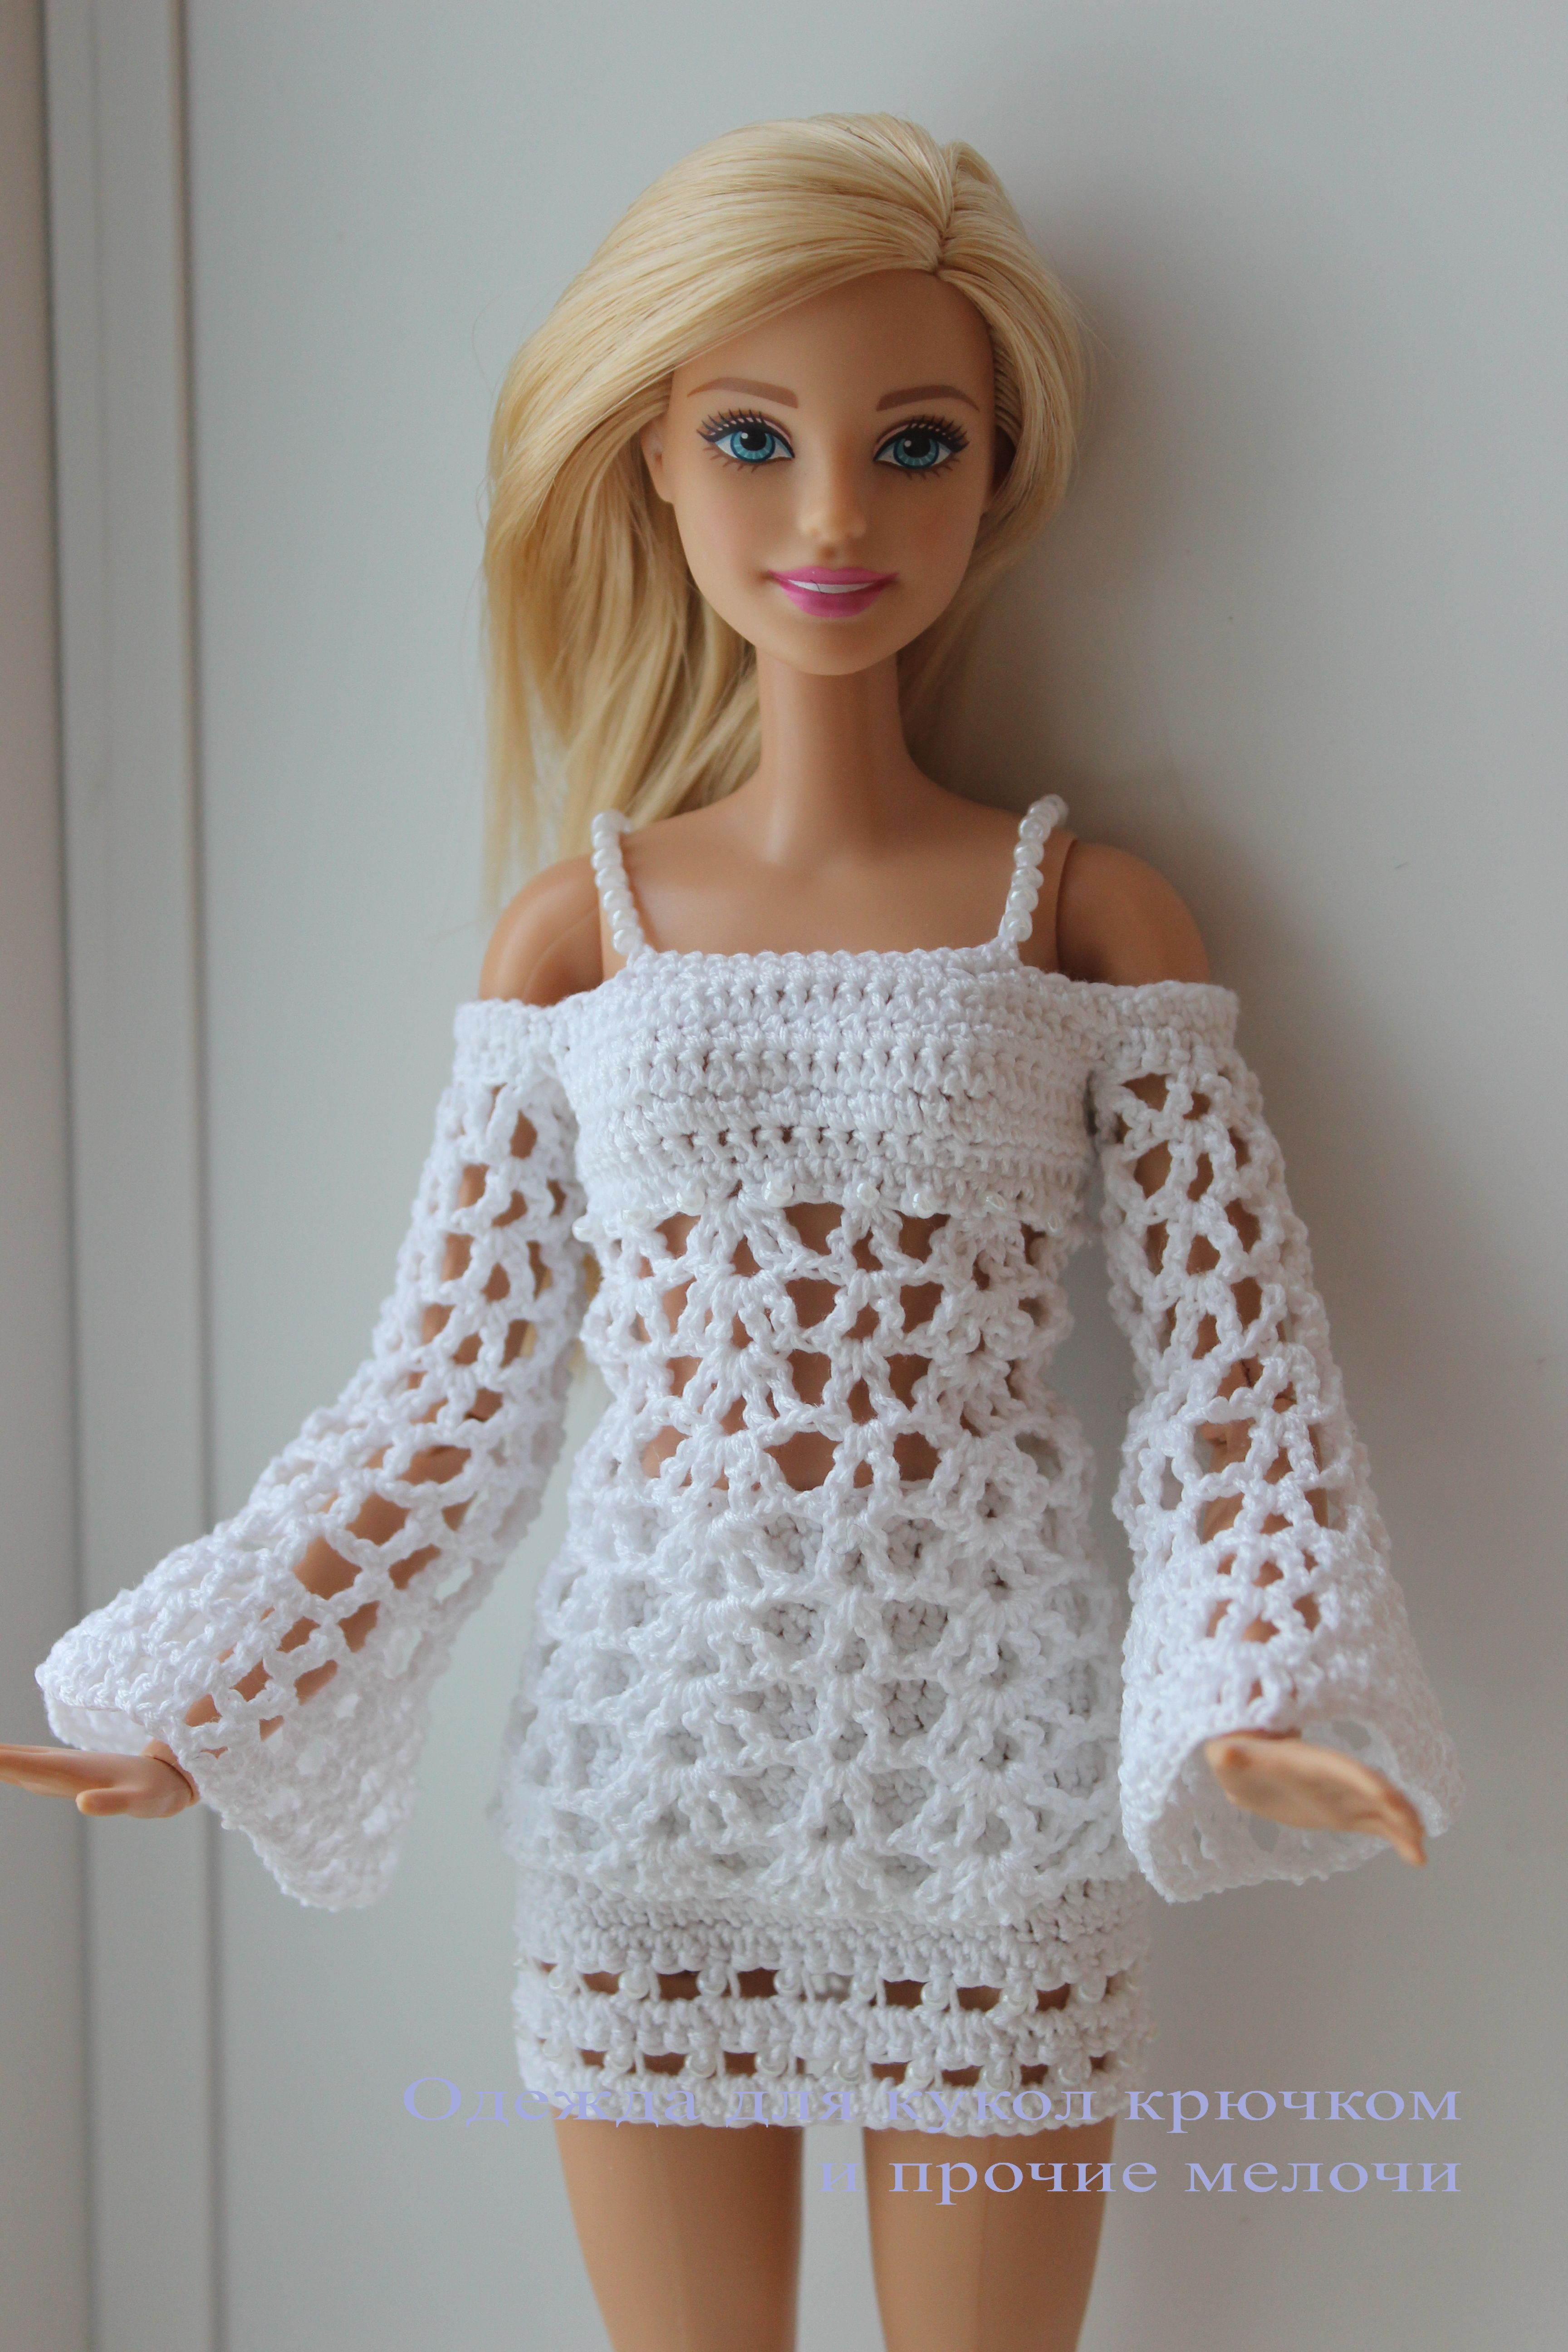 Crochet Clothing Patterns Little Known Ways To Make Doll Clothes Yourselves Girlie Toys